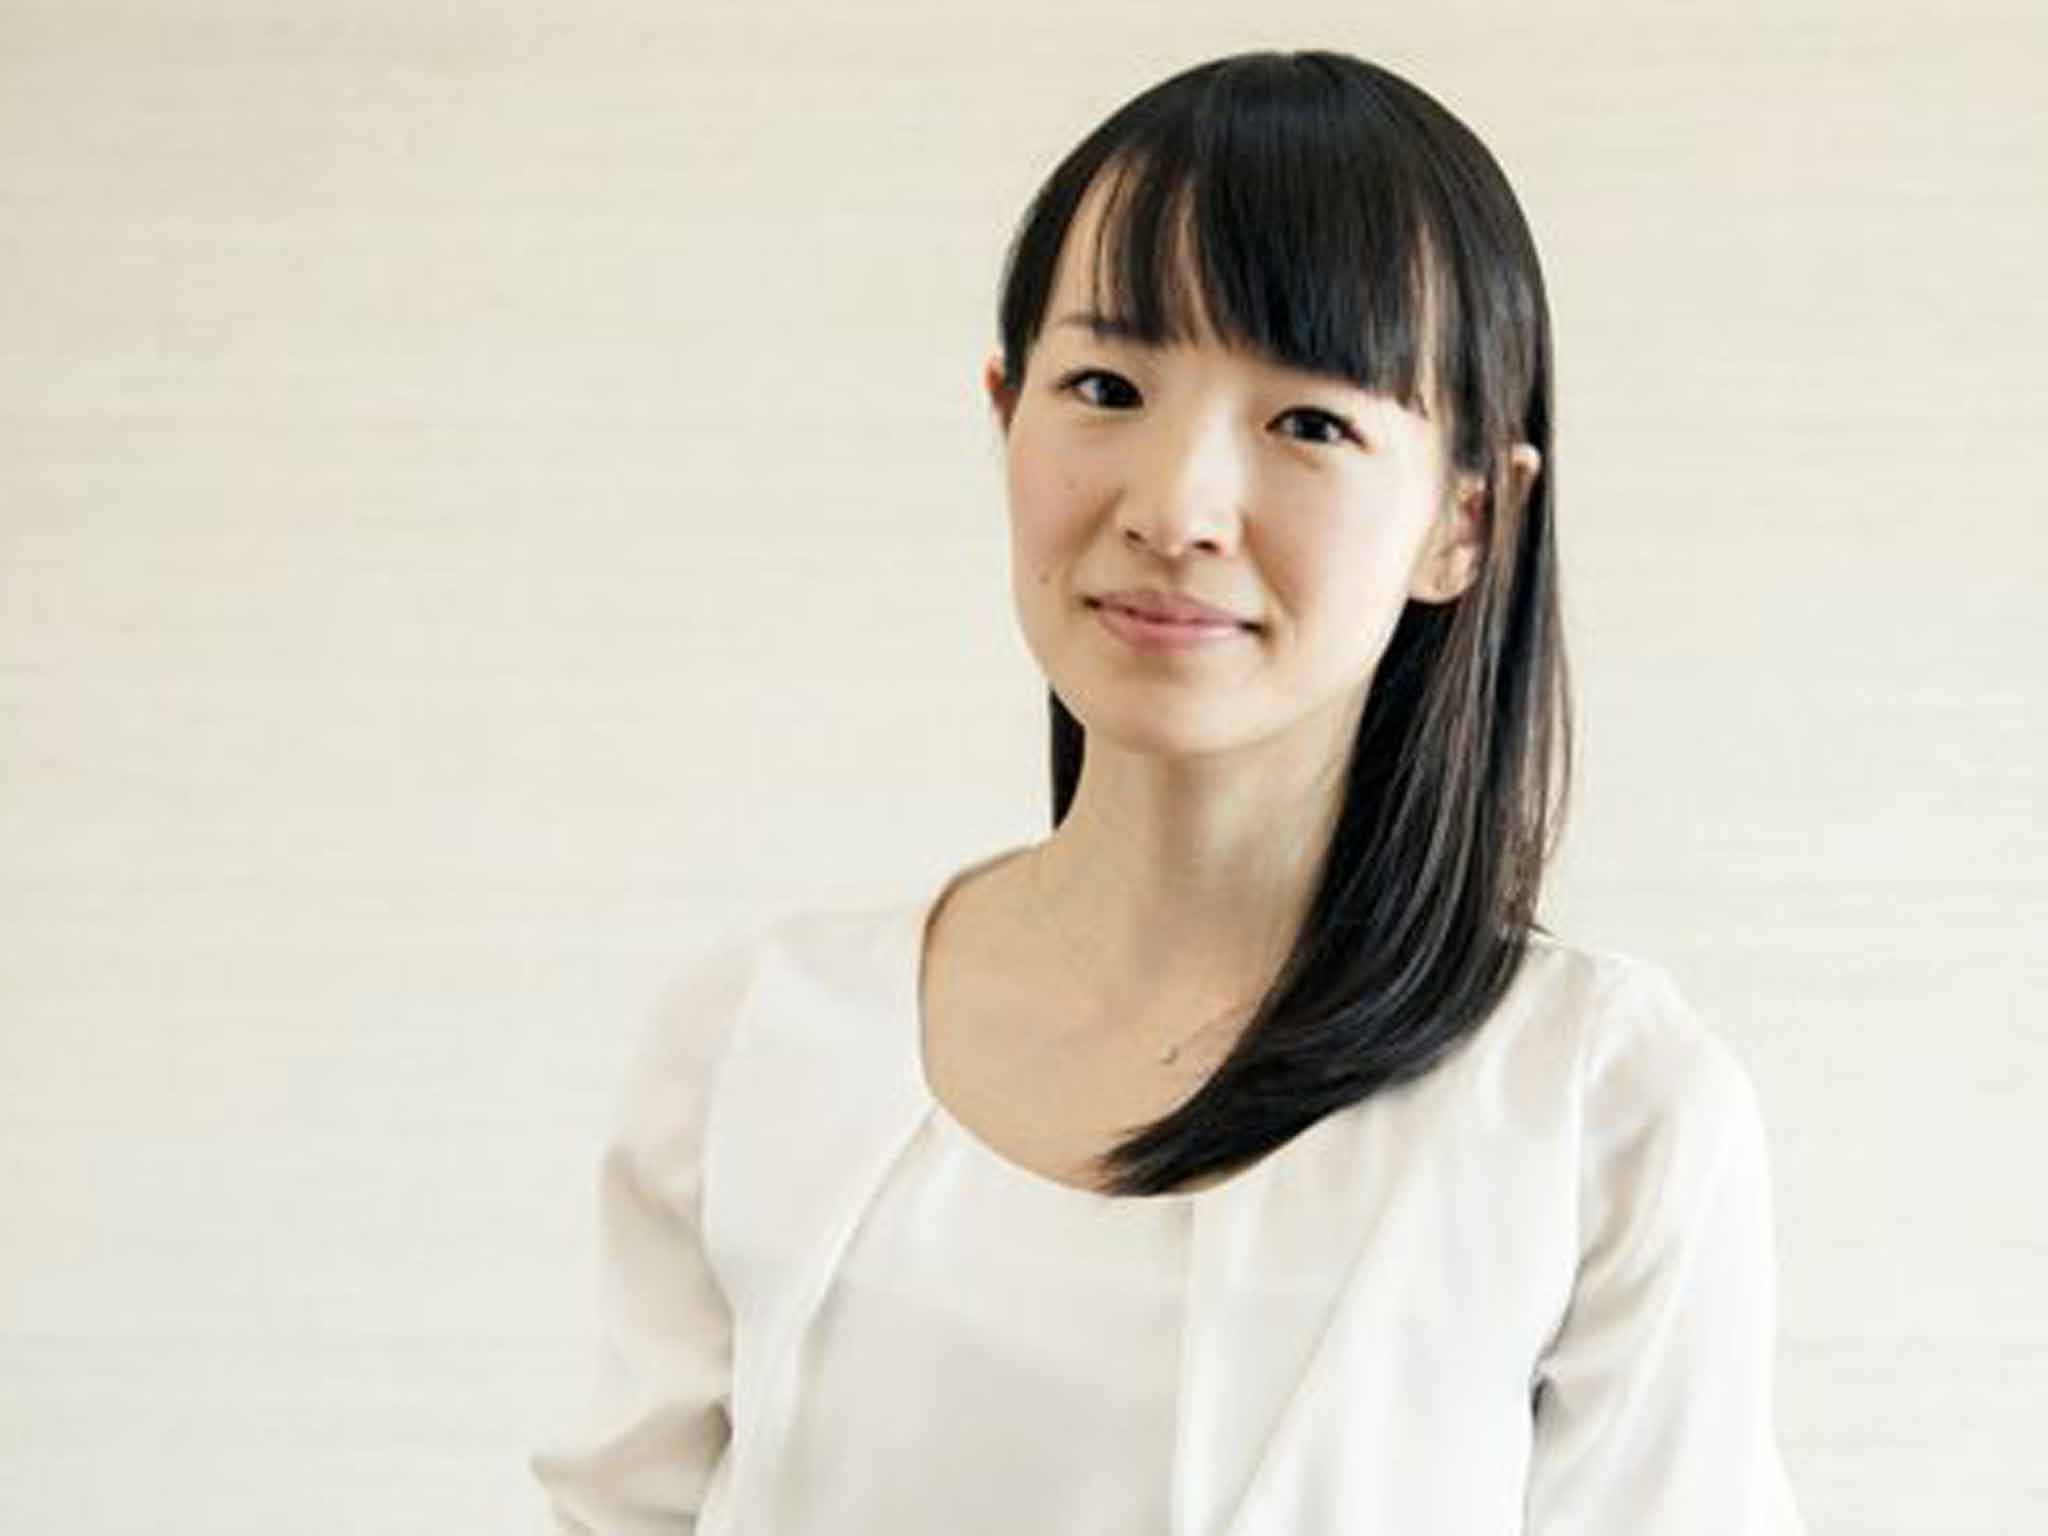 Neat freak: Marie Kondo turned an obsession with tidiness into big business (Marie Takahashi)